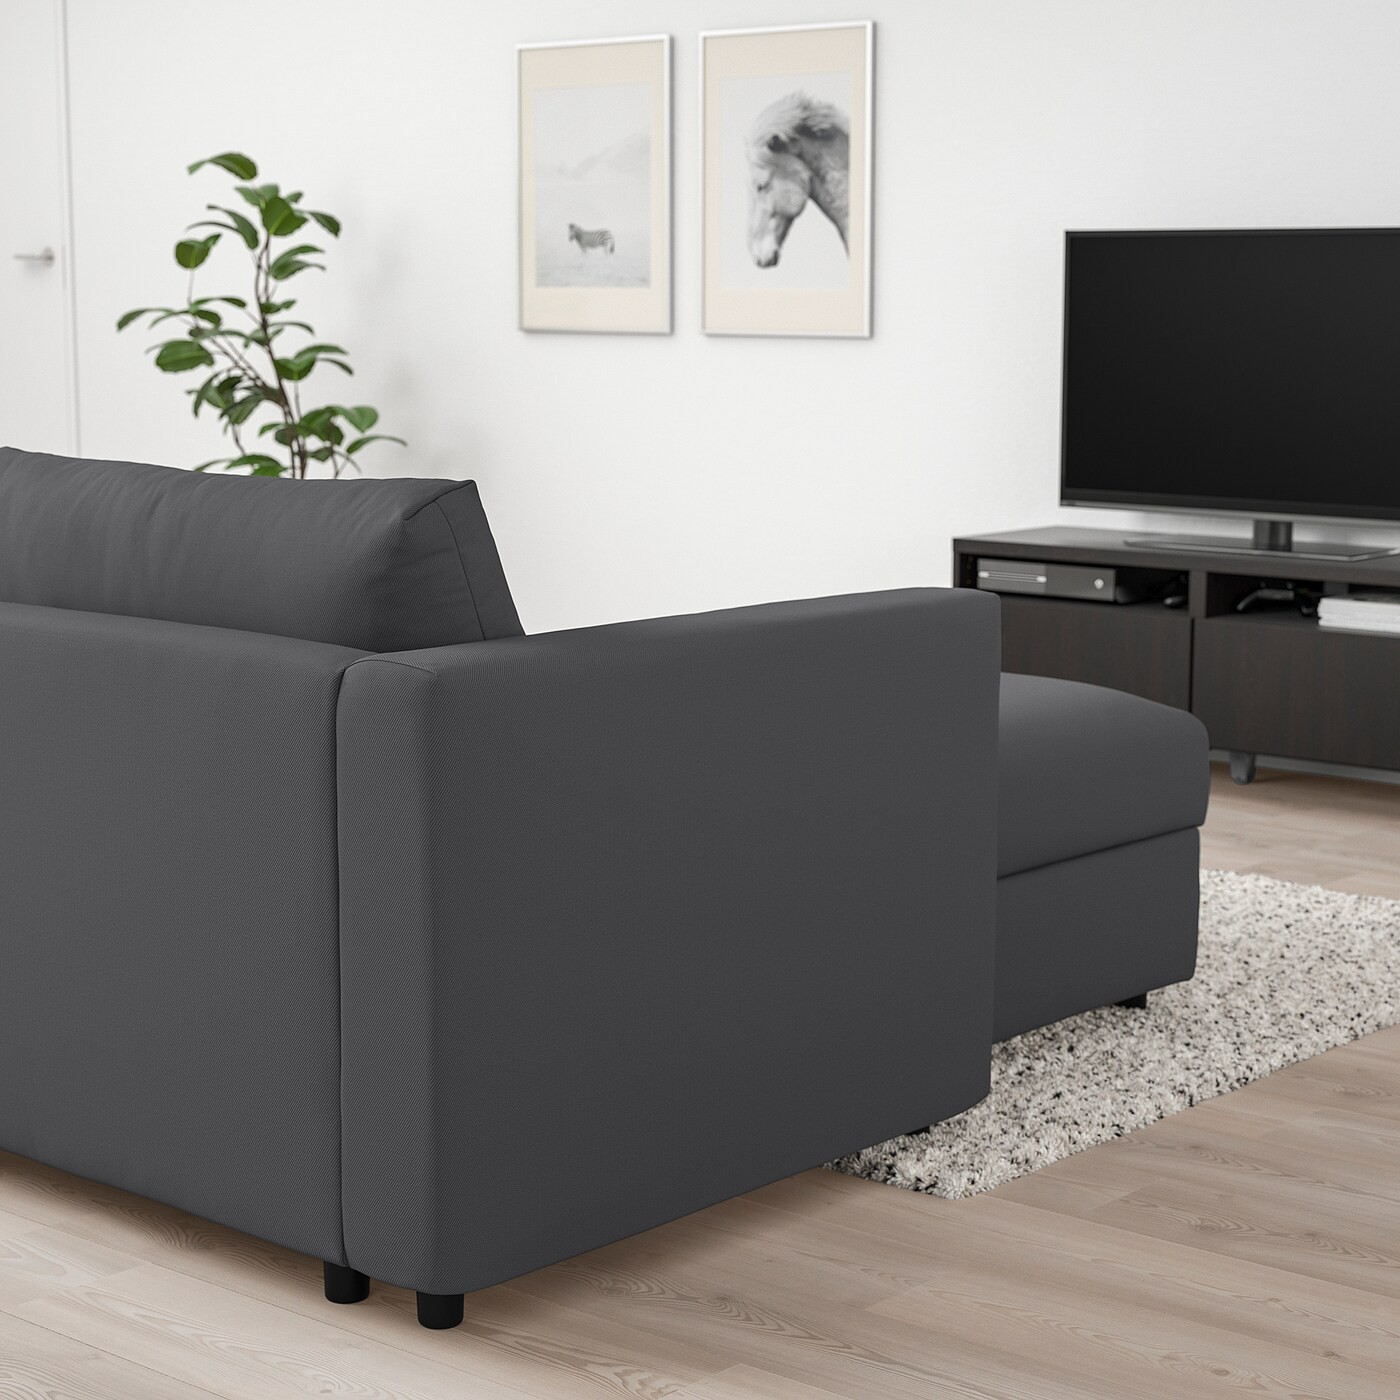 VIMLE Crnr sofa-bed, 5-seat w chaise lng